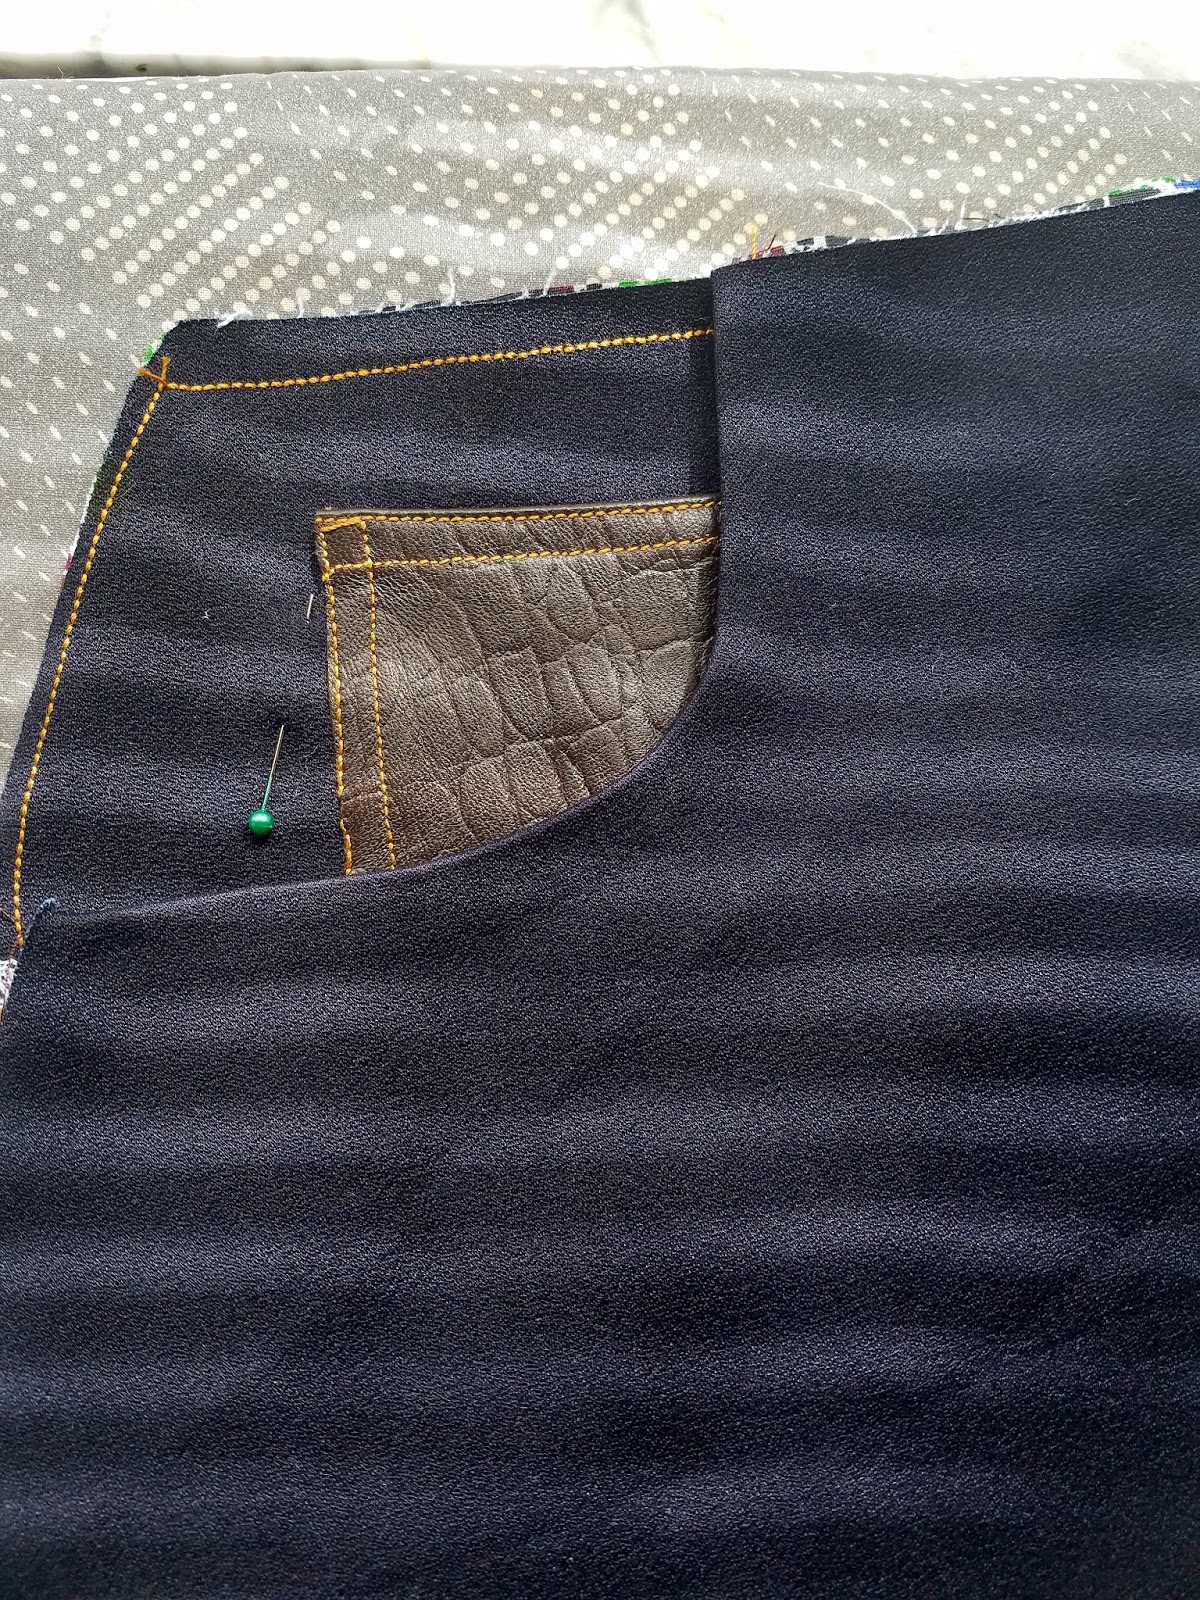 Week 4: Jeansmaking- What They Made